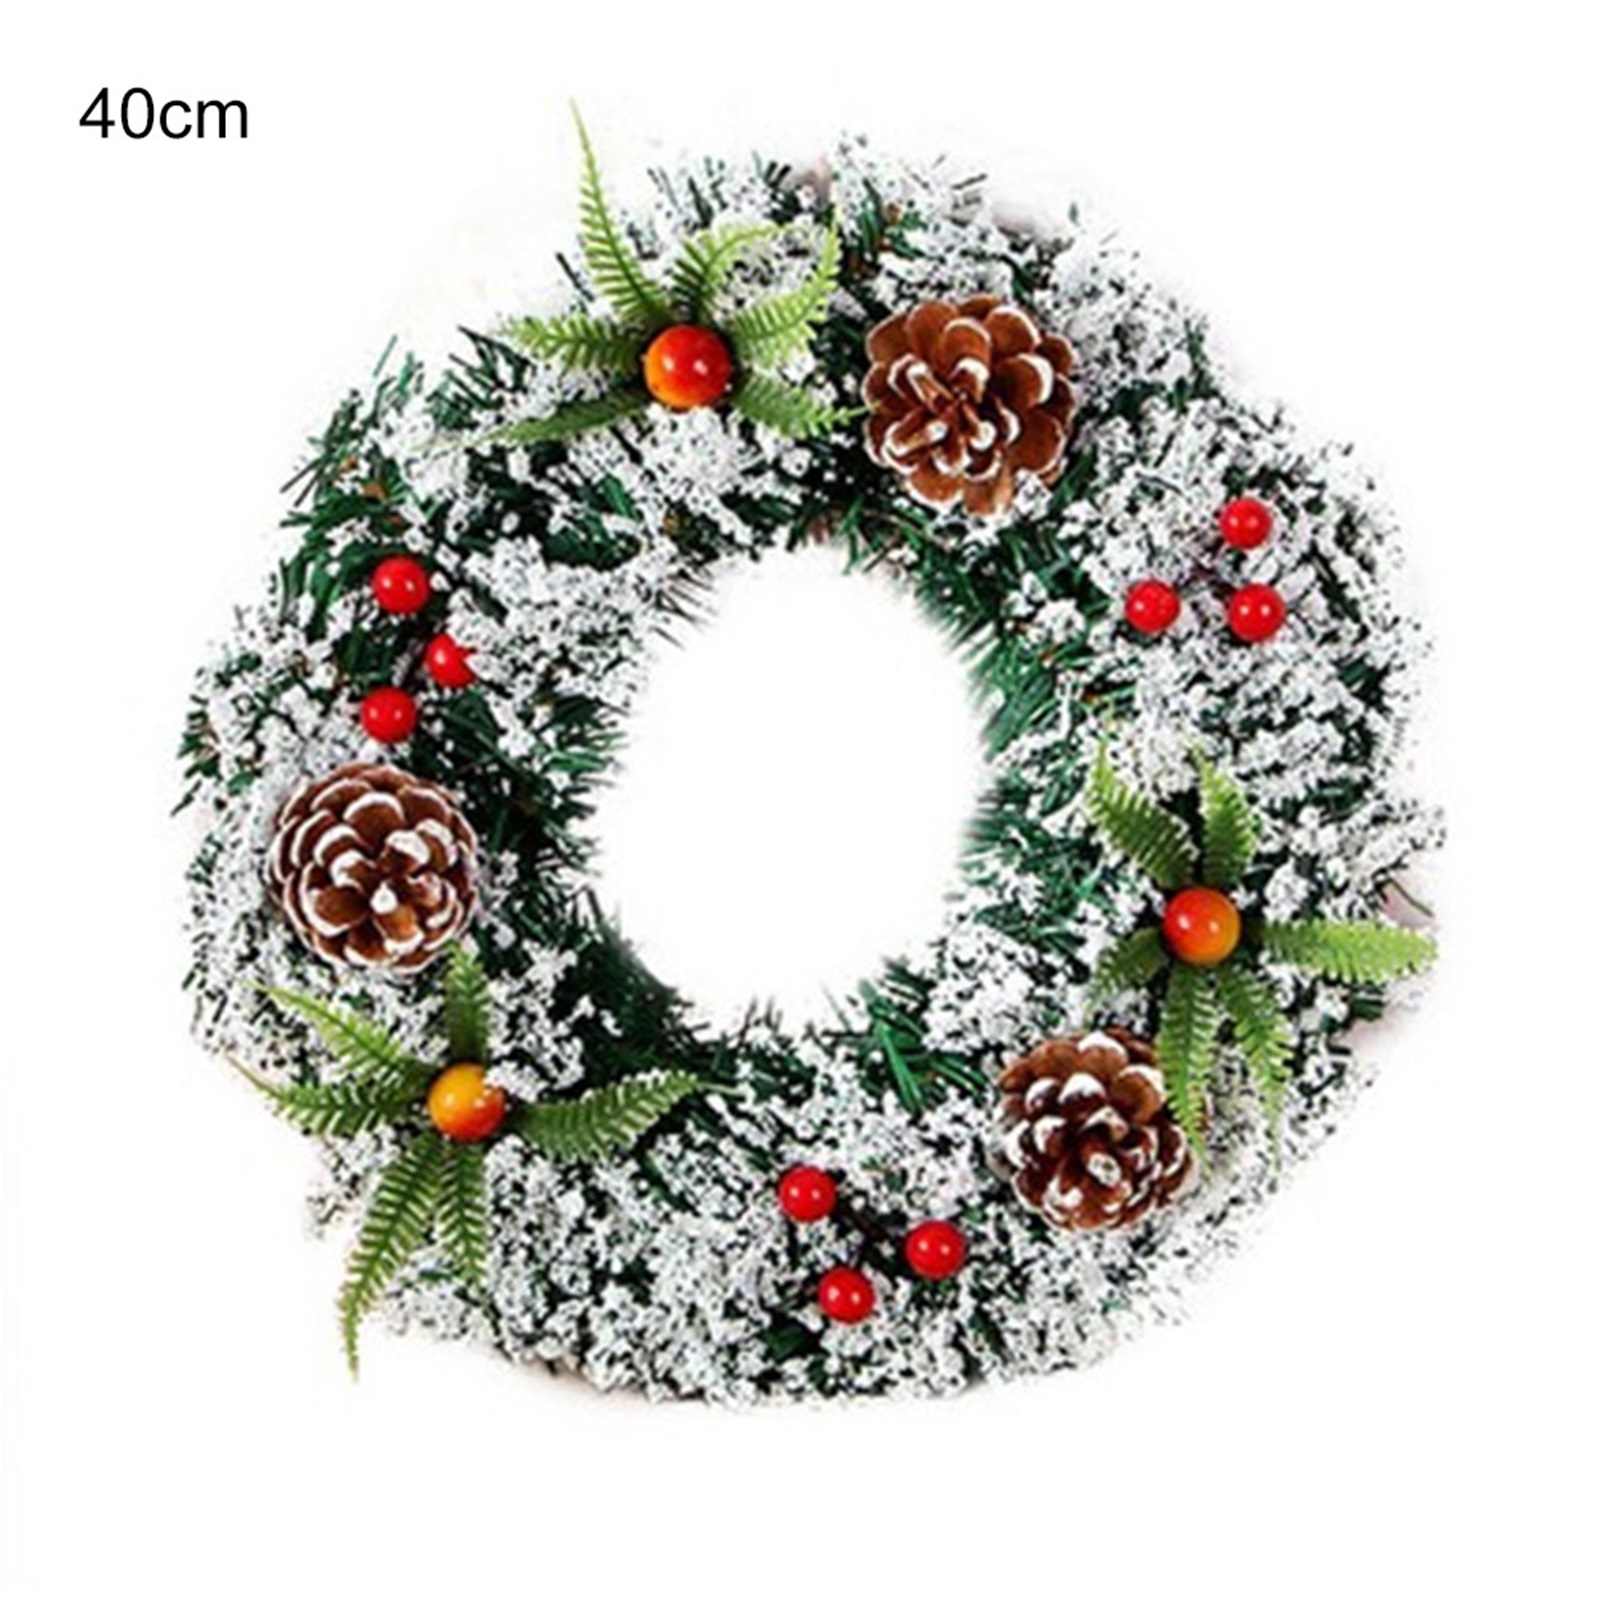 Christmas Wreath Hanging Garland Xmas Party Ornaments OutDoor Wall Home Decor US 